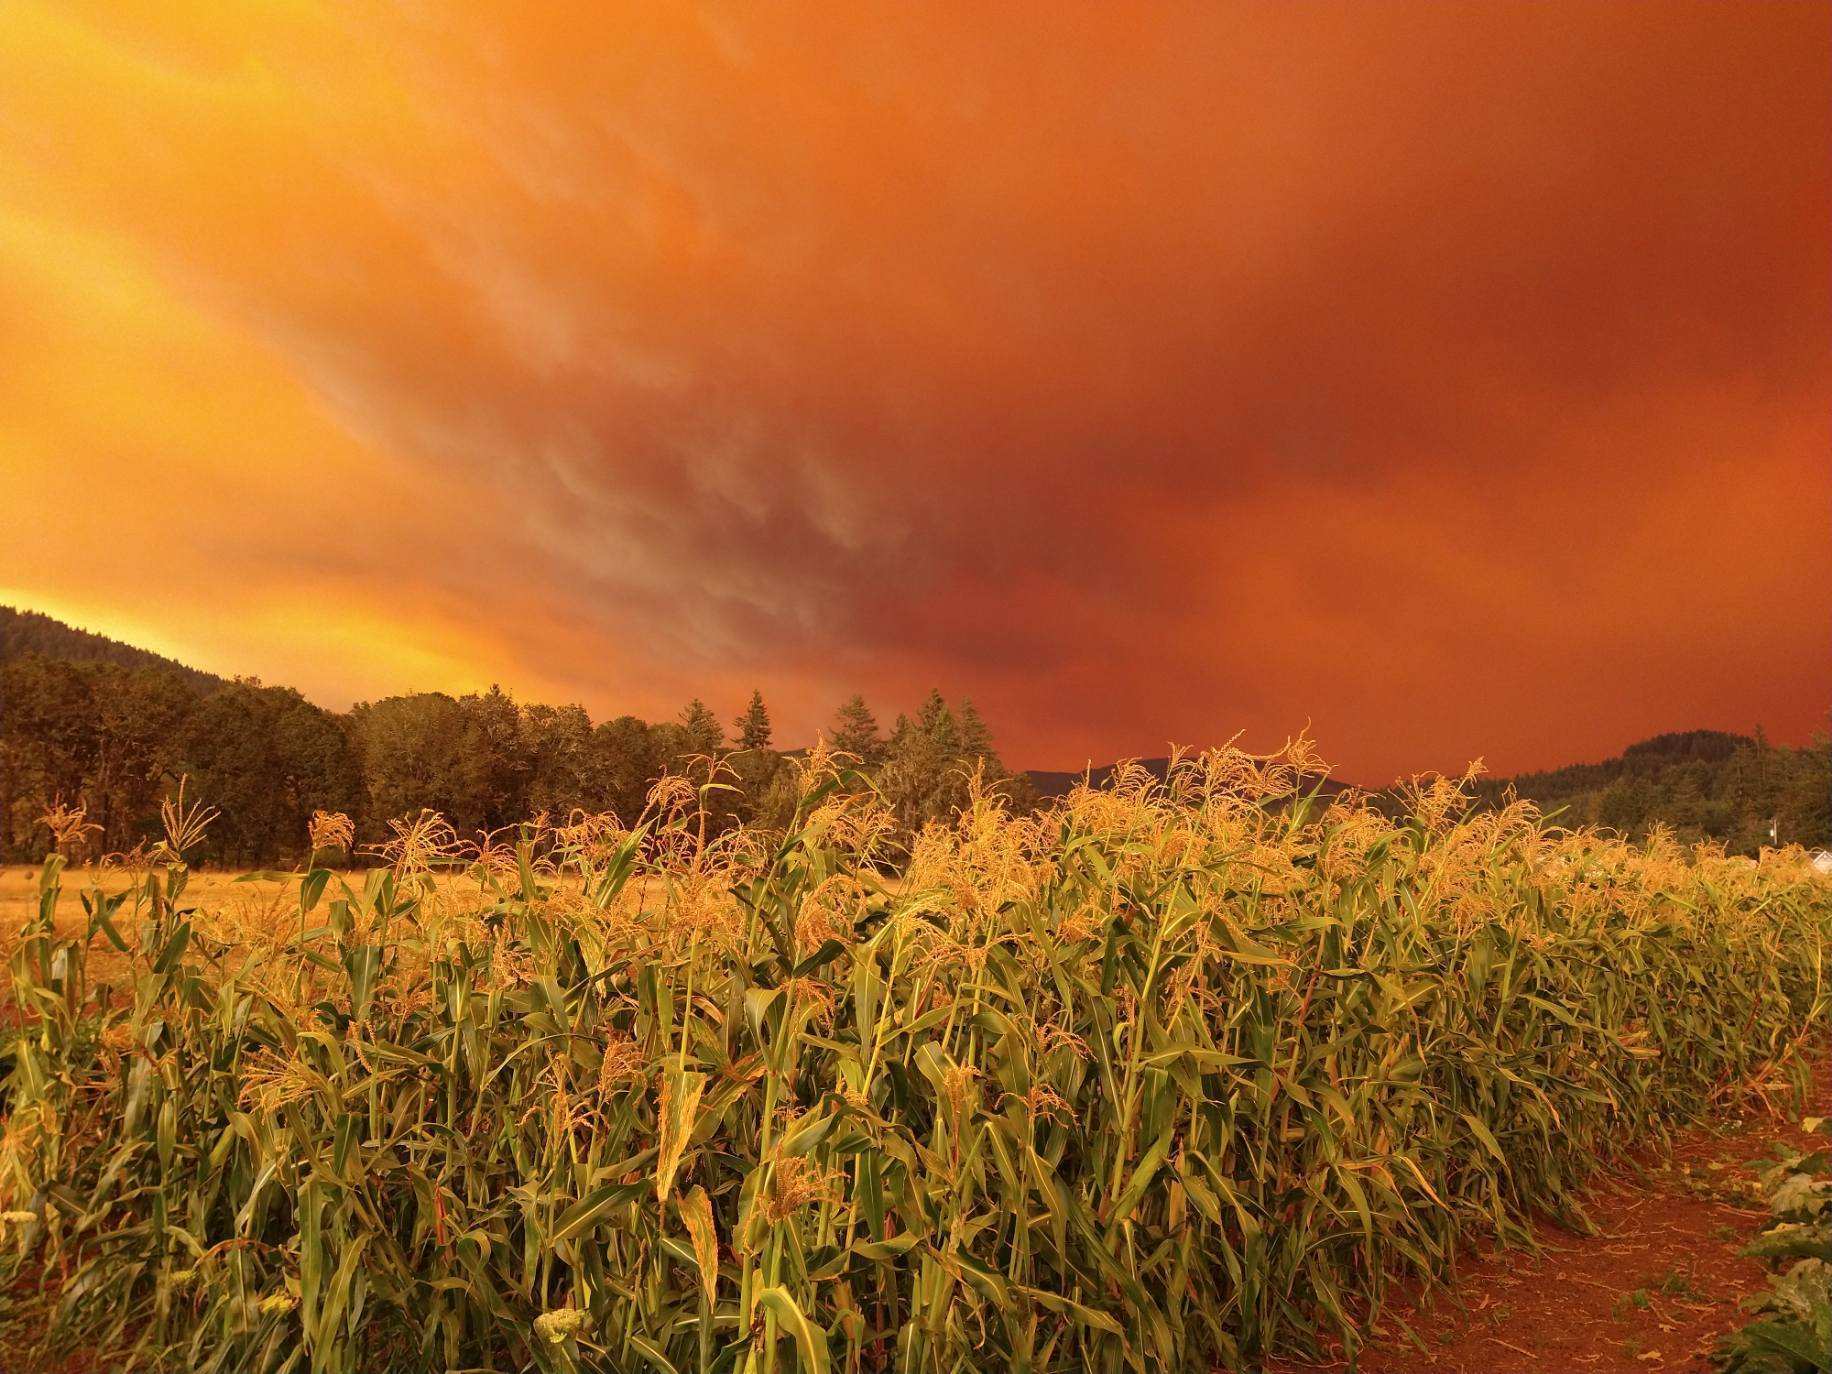 The farm at Adaptive Seeds in Oregon with wildfire skies over a corn field. September 2020